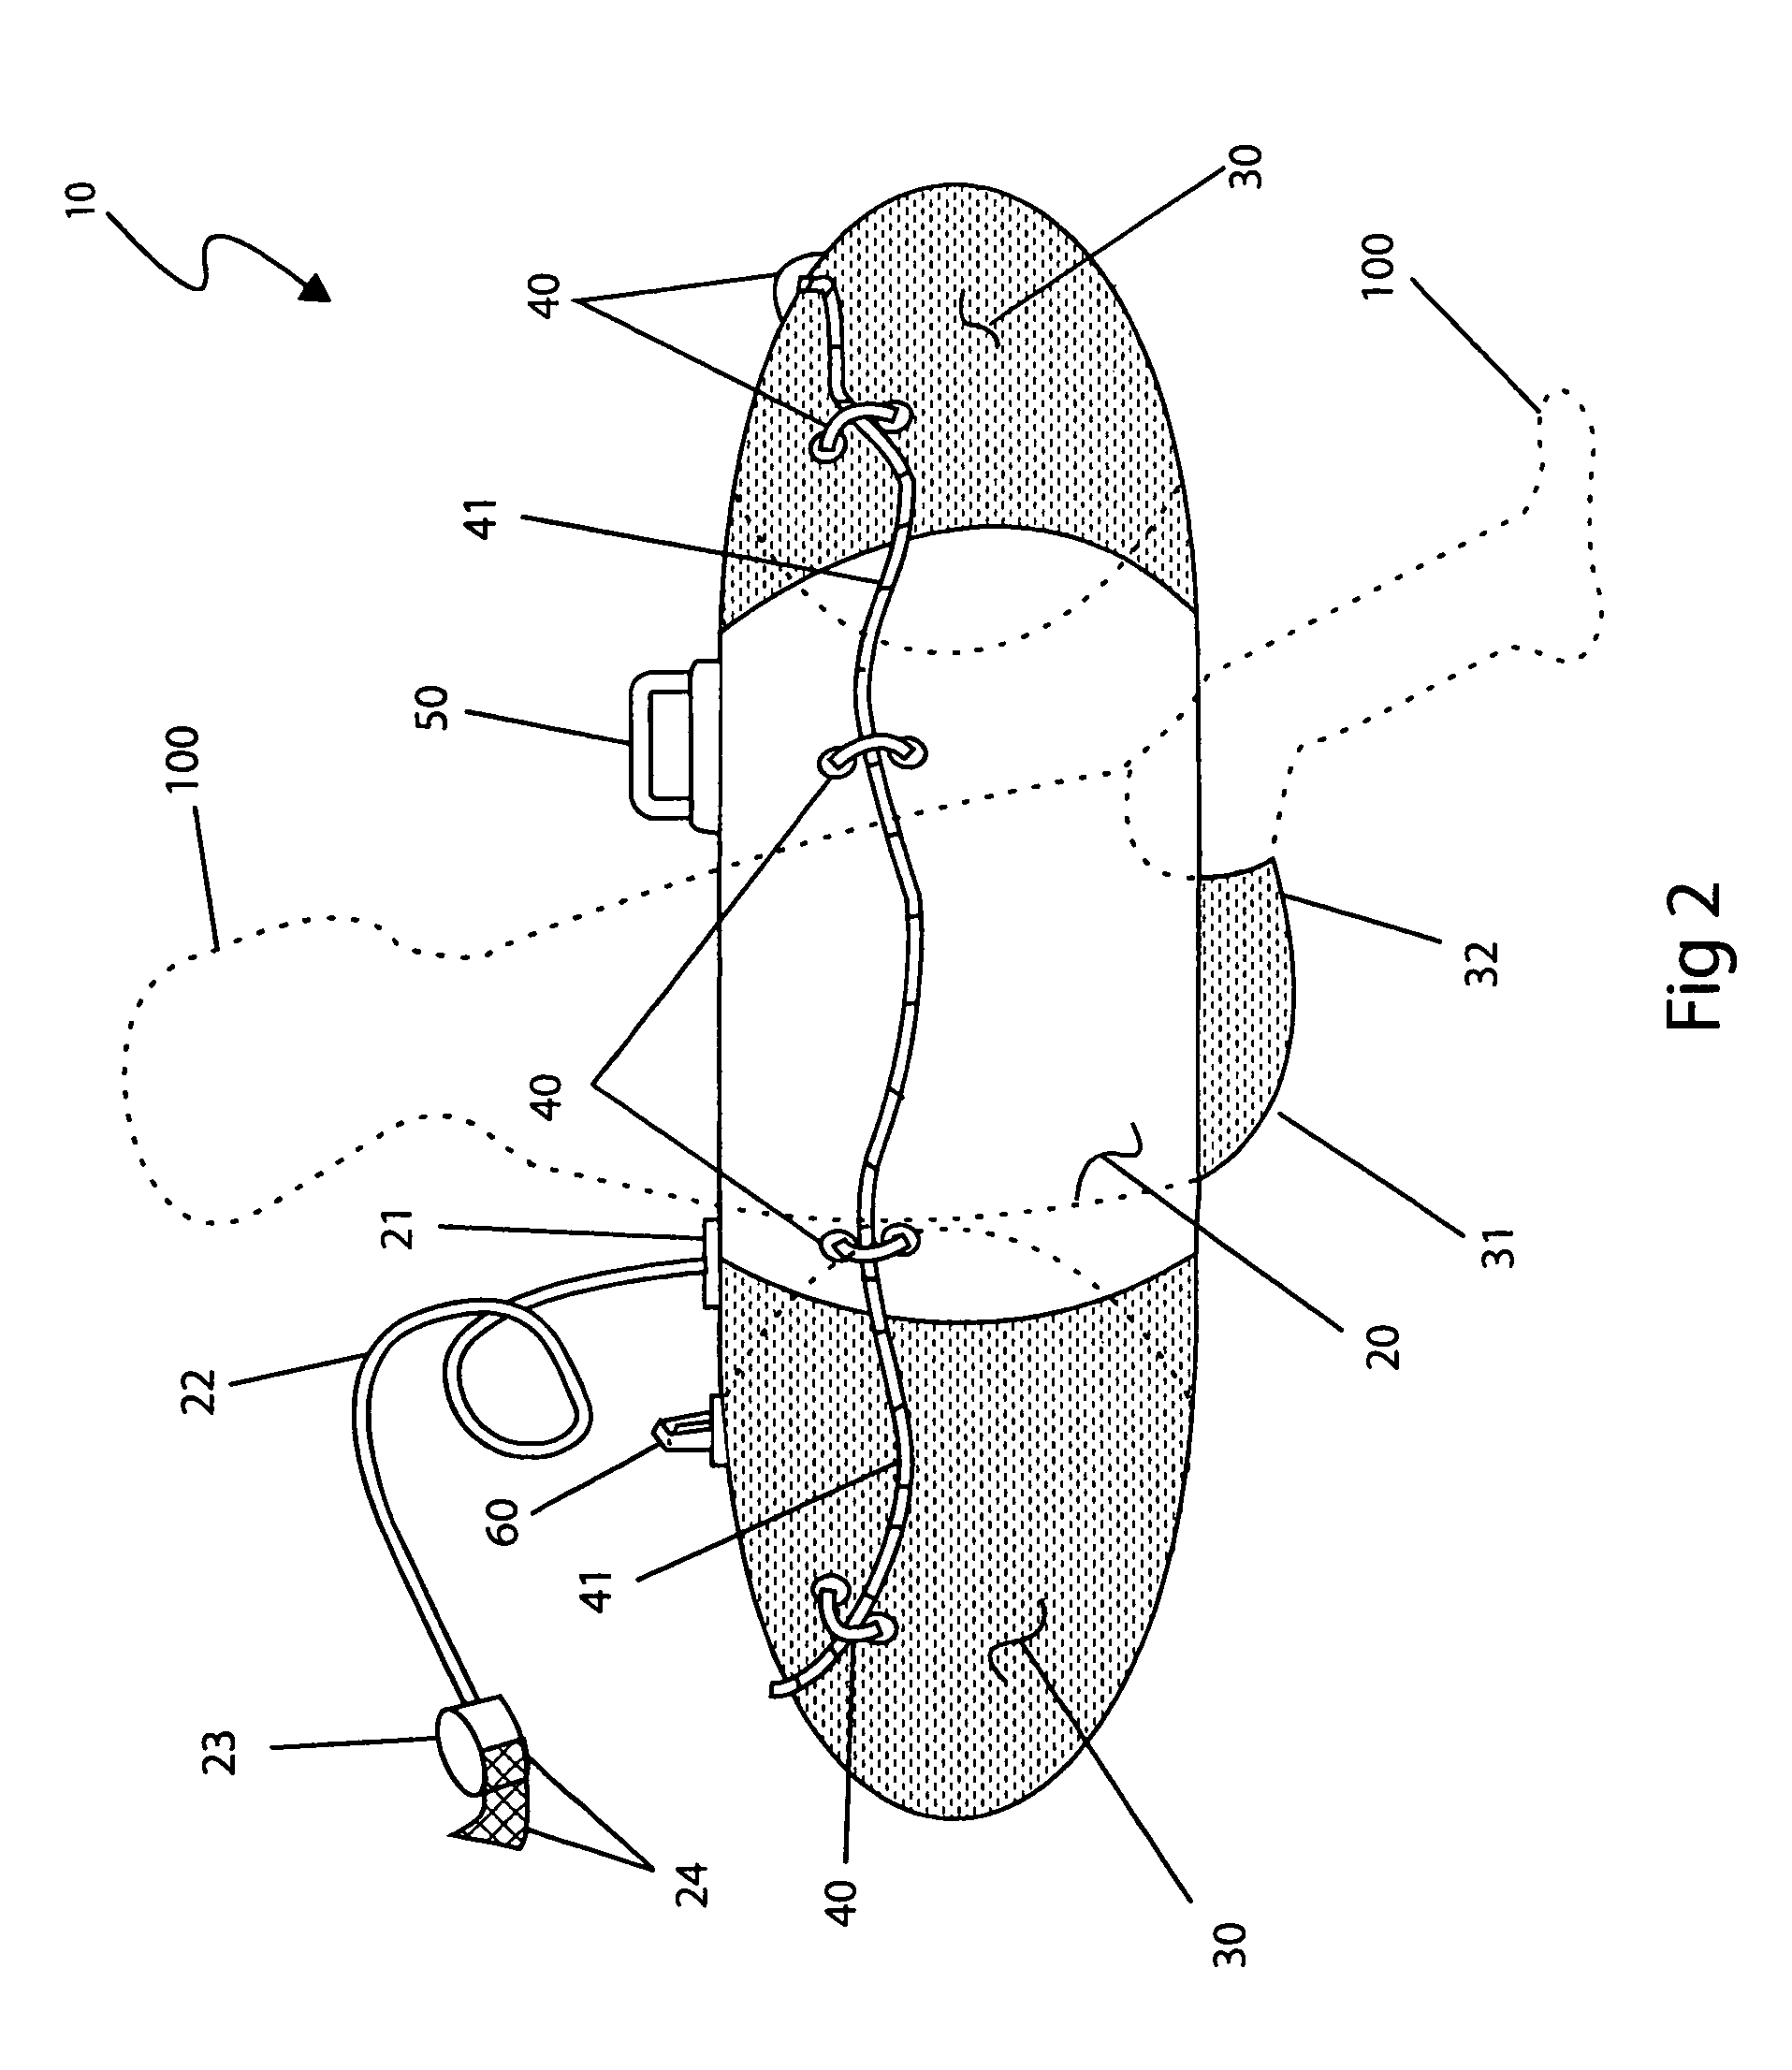 Tethered flotation device and method of use thereof